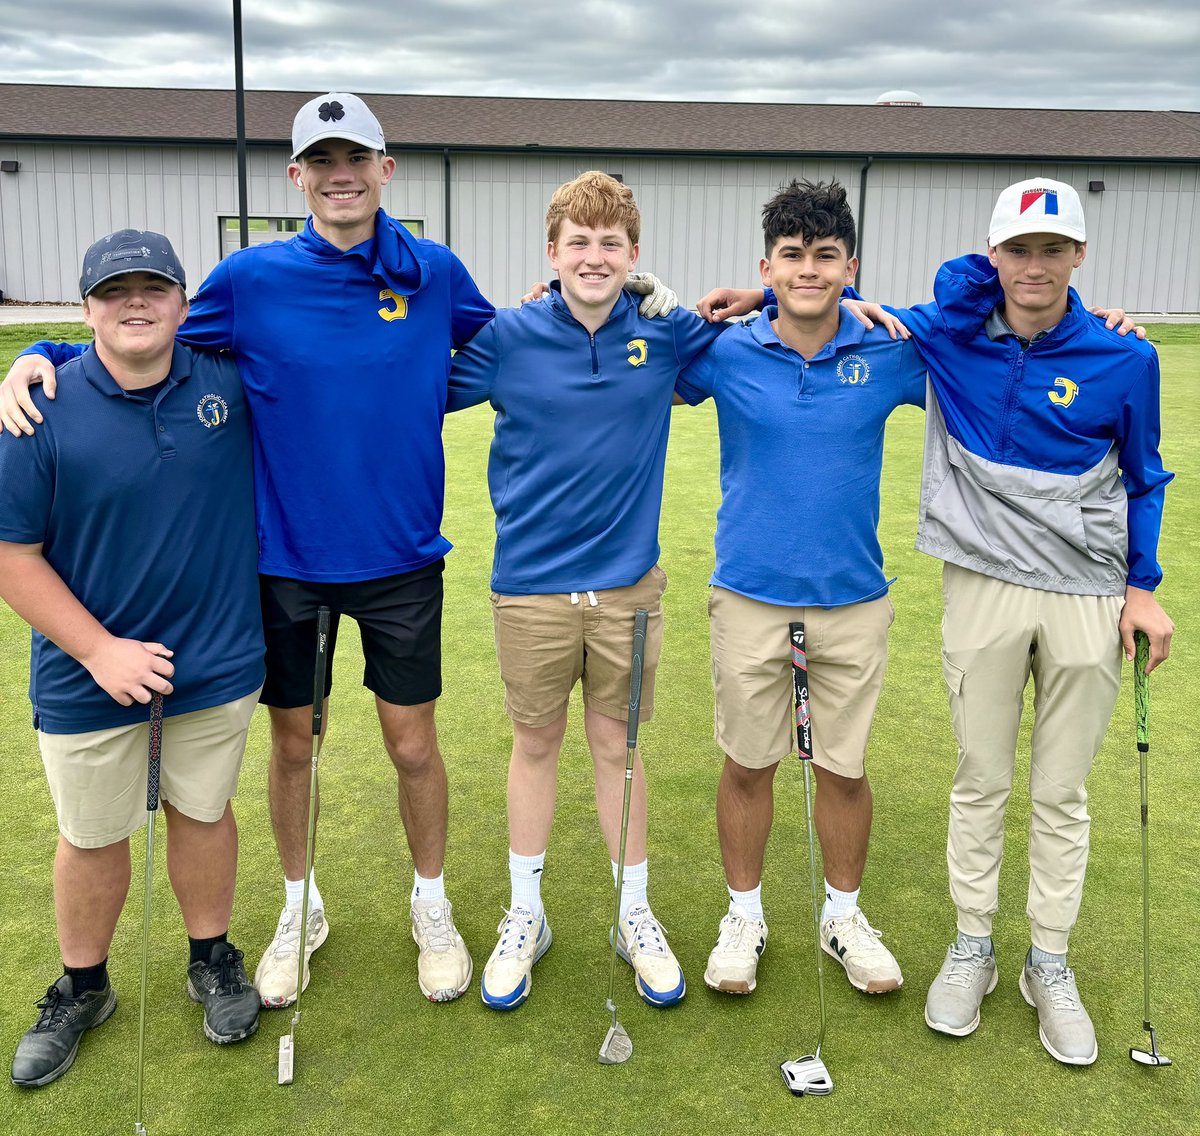 Good luck to our boys golf team today at regionals!  Go Lancers!!  #LancerPride